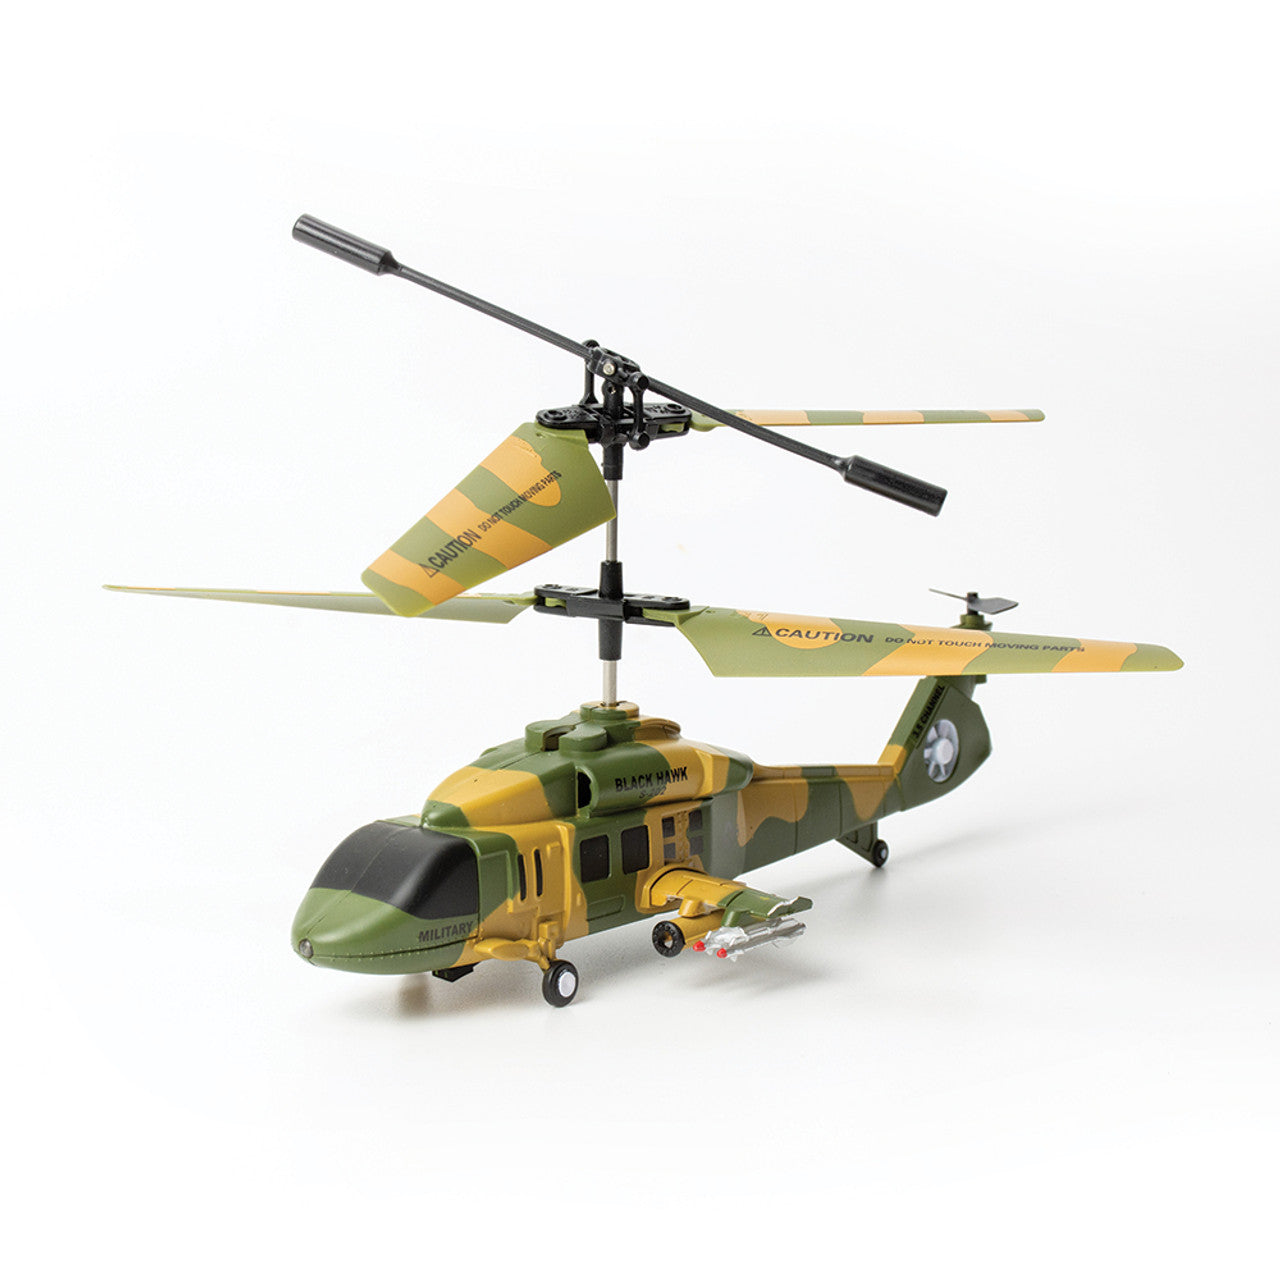 RED5 Remote Control Military Helicopter